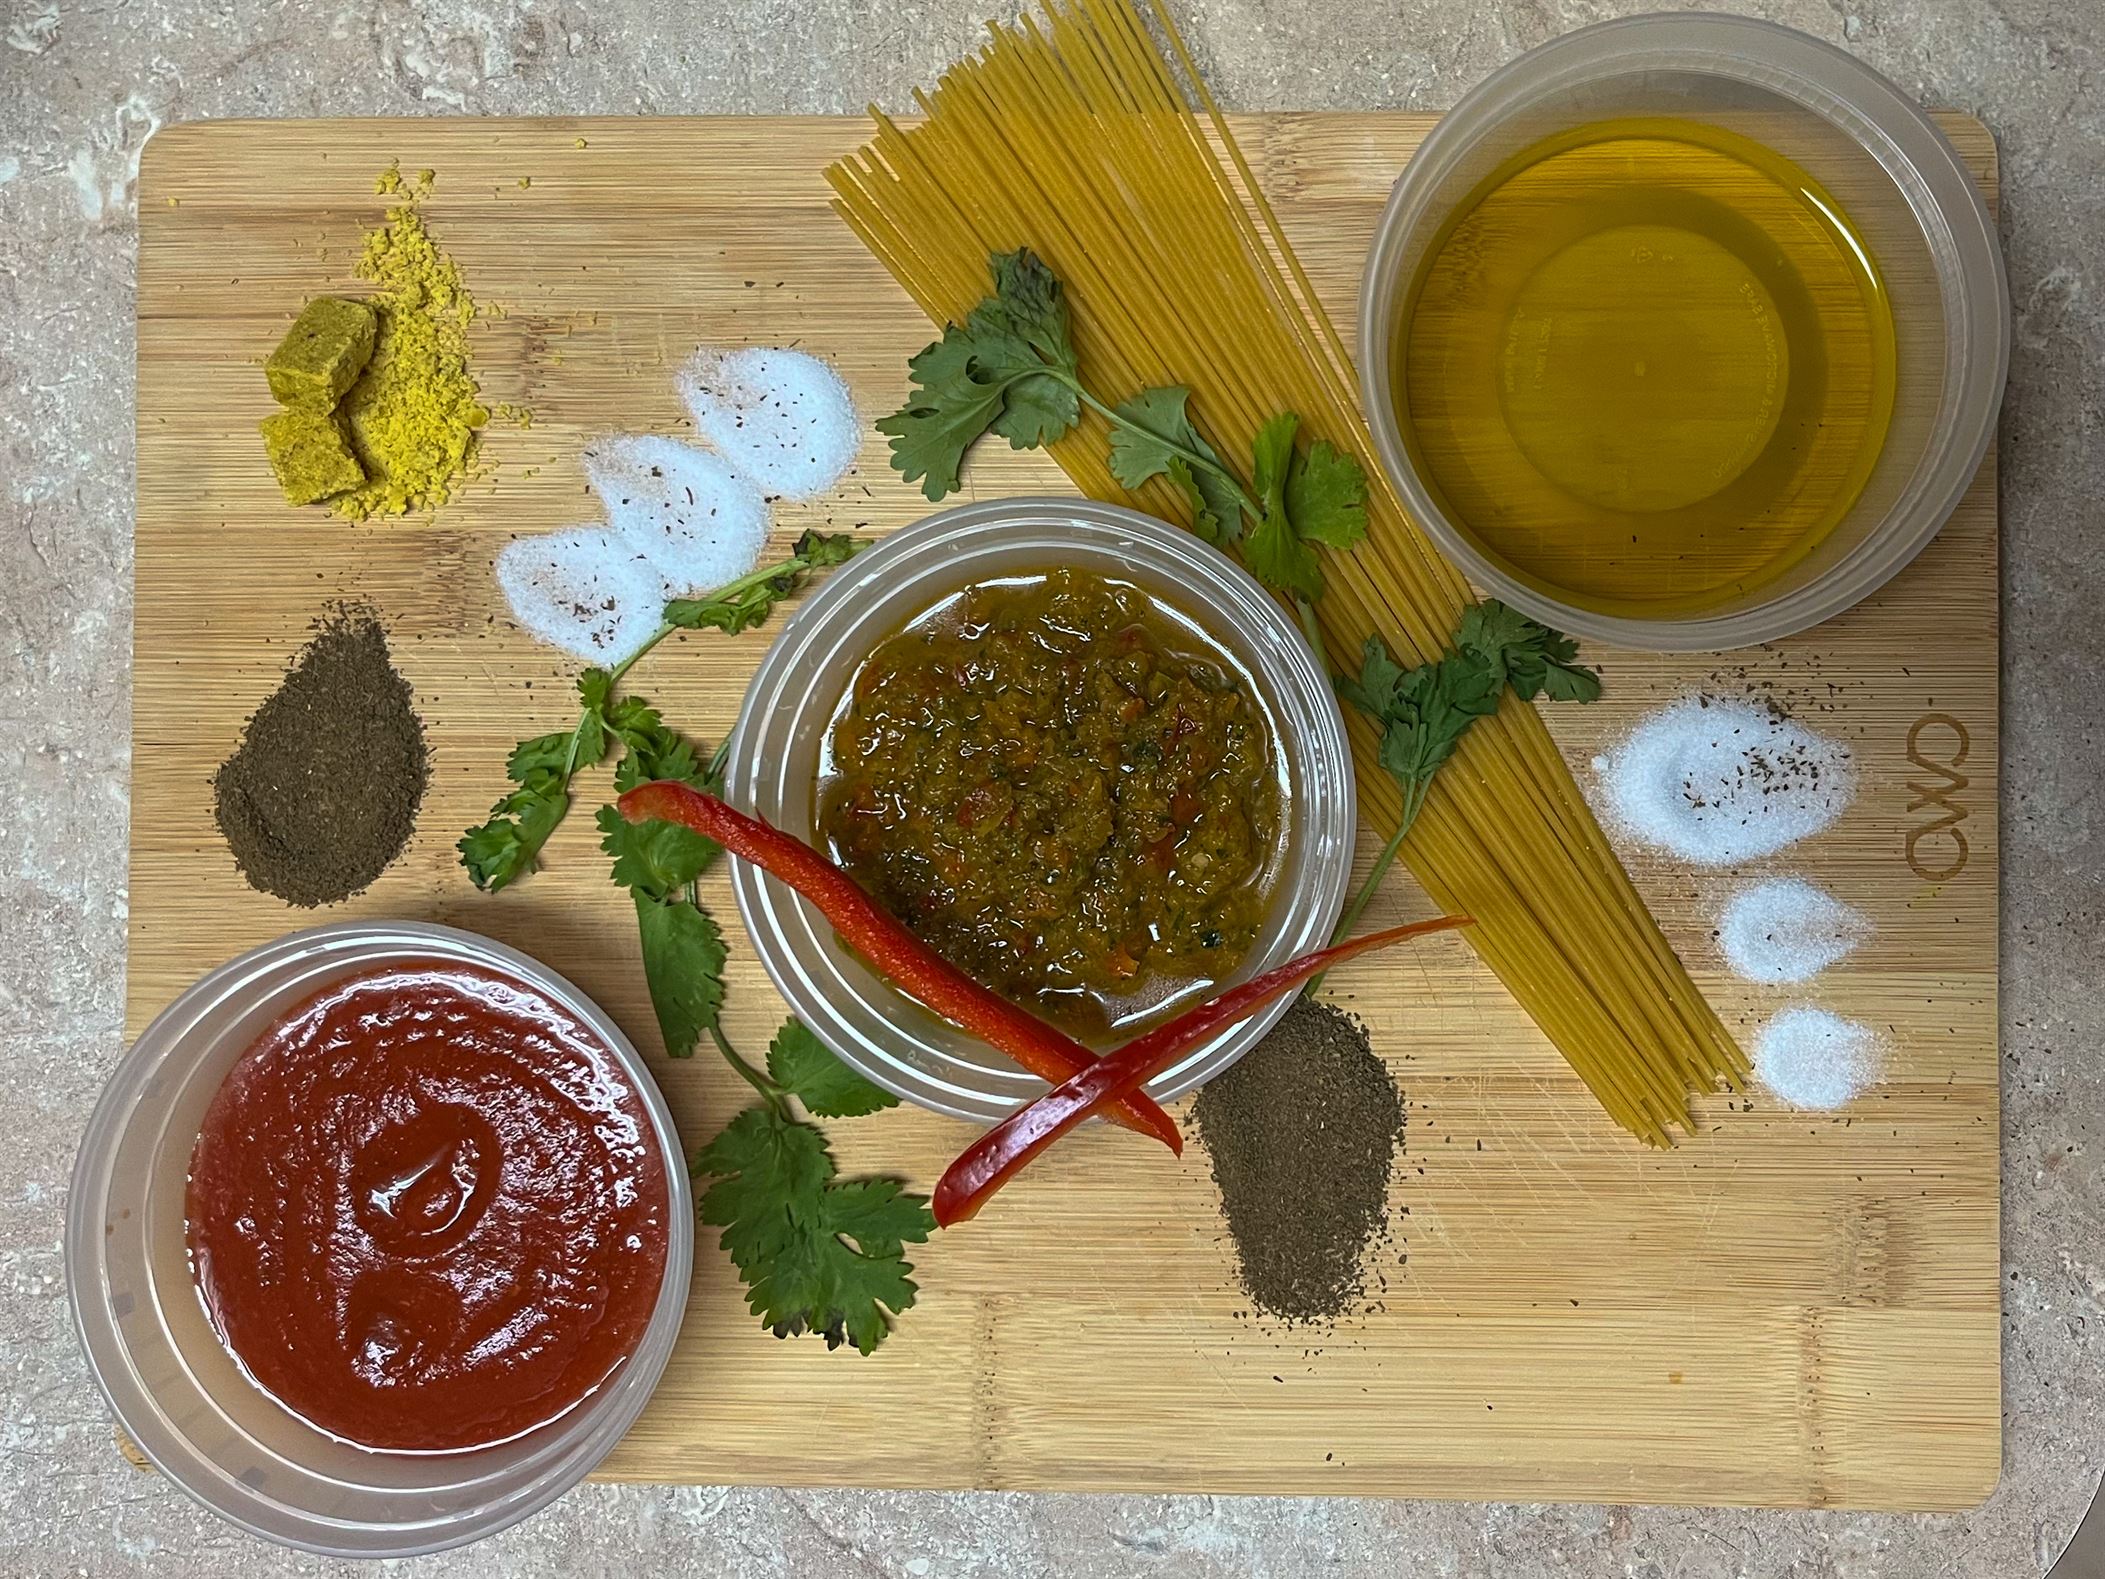 Cilantro or culantro, red pepper and oregano are one of the many ingredients in sofrito, the star of this dish!